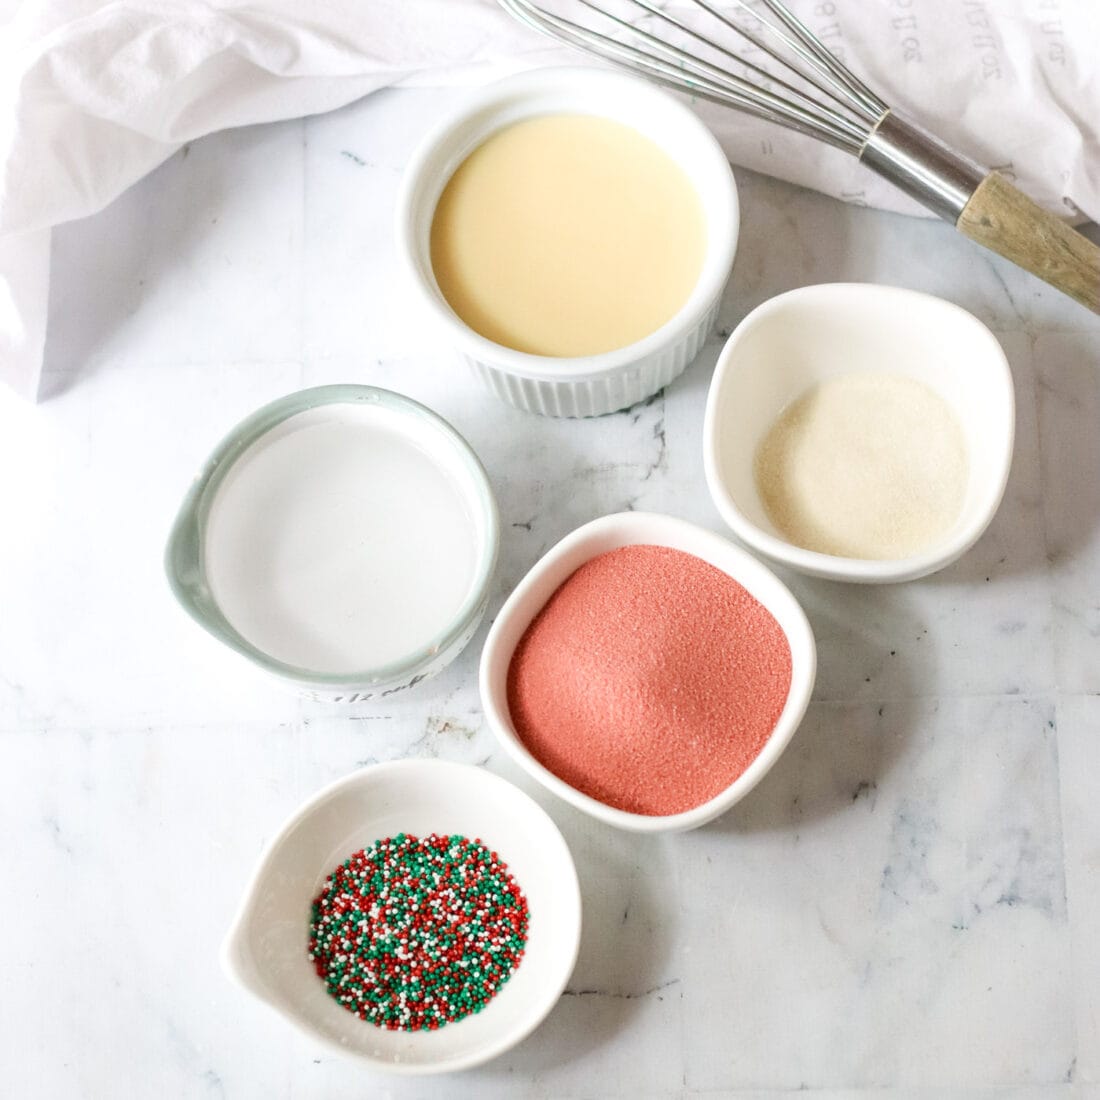 ingredients for Candy Cane Jello Shots